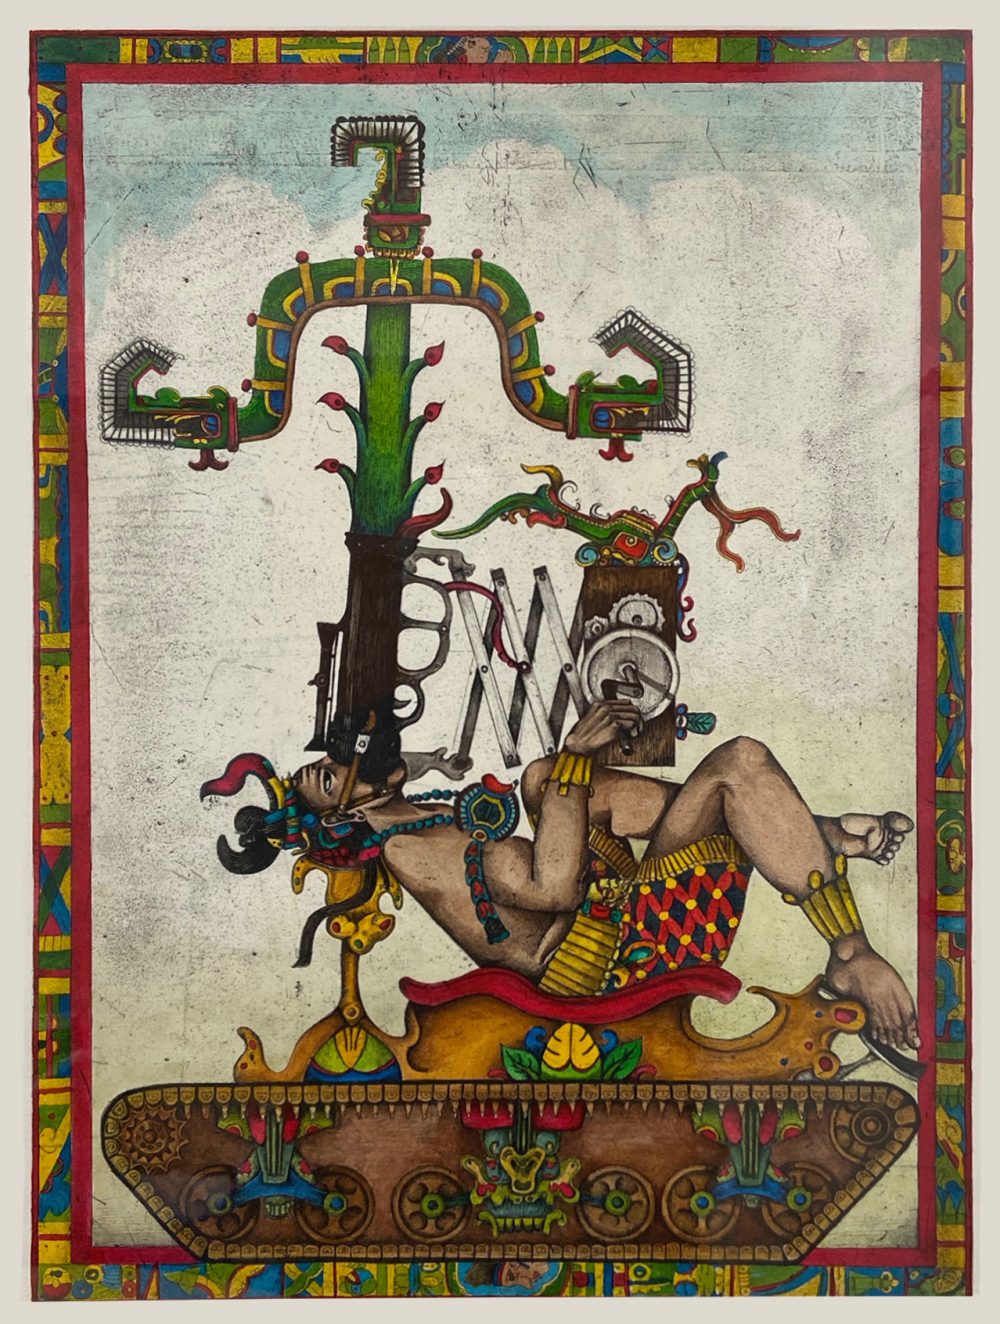 Intalglio print that has been hand colored. A male figure dressed in the style of indigenous people of Central America is laying back on an elaborately decorated platform. His body is seen in profile. The base of the platform looks like the base of a tank, with gears and a tread. Protruding from the mouth of the man is what looks like the barrel and scope of a weapon, and a tall plant grows out of that barrel. In the background is a cloudy sky with a band of light blue at the top. A colorful border frames the image. Predominant colors in the work include green, red, yellow, brown and blue